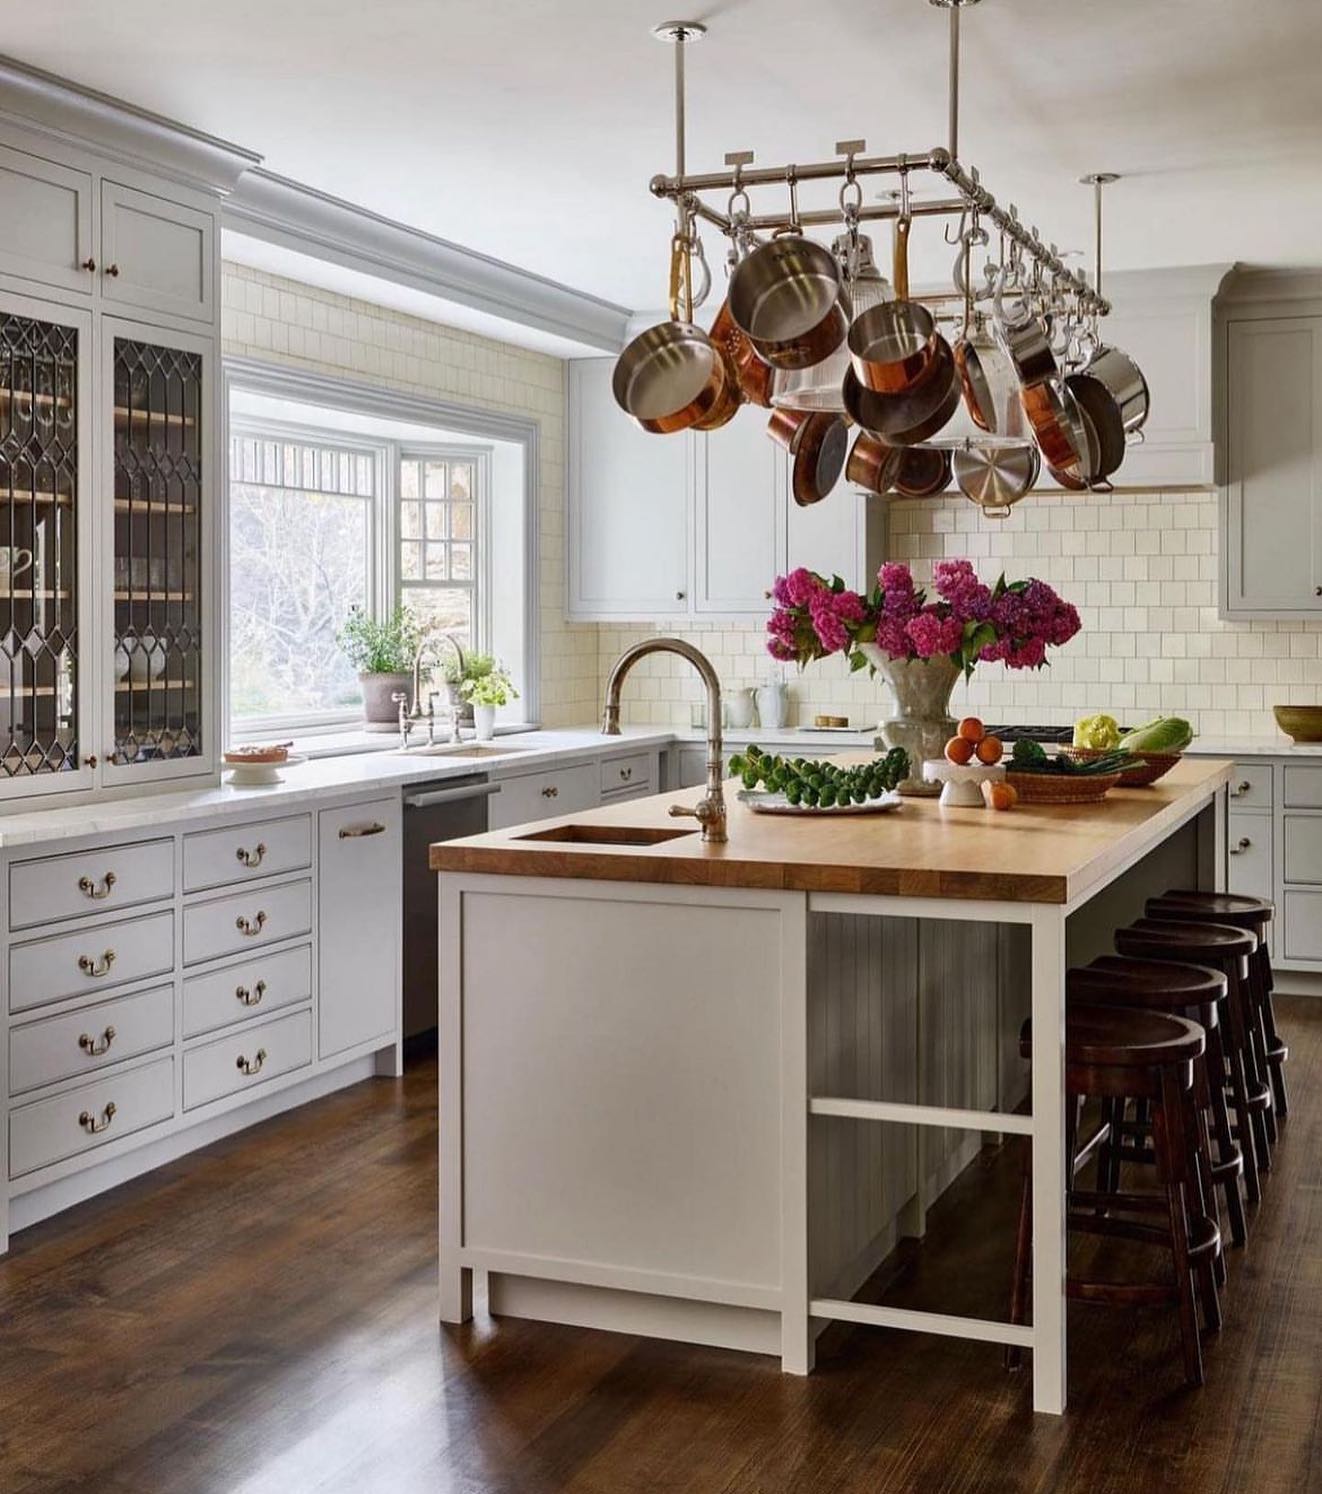 pots and pans rack suspended from the ceiling over a kitchen island adds a rustic element to this kitchen while being practical.